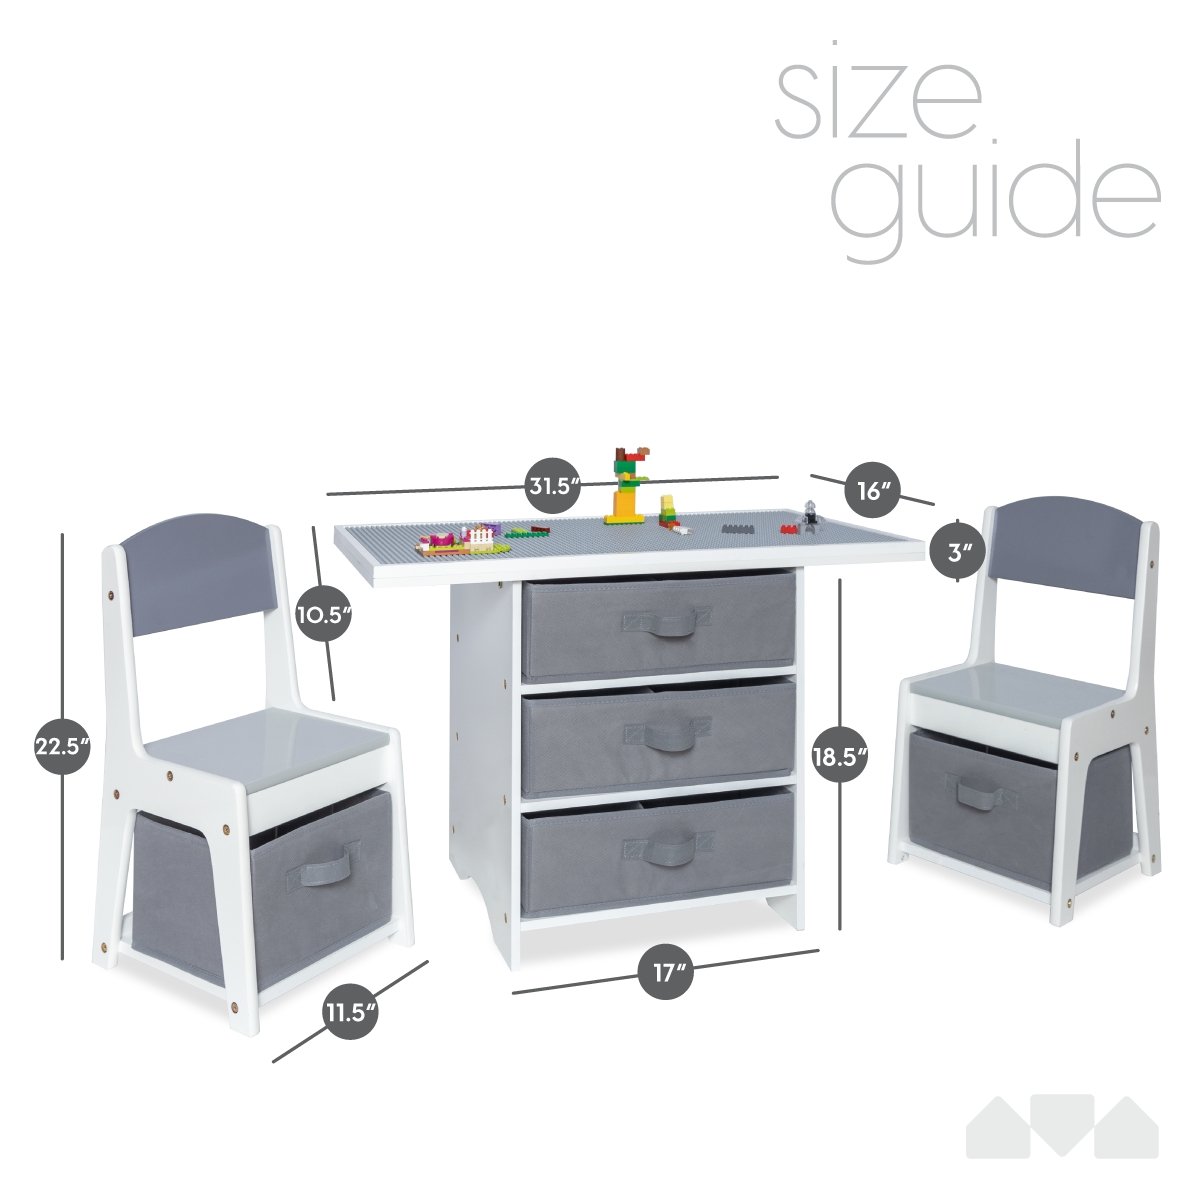 Table Bedding with Play Table | 3-in-1 Kids Storage Milliard Play